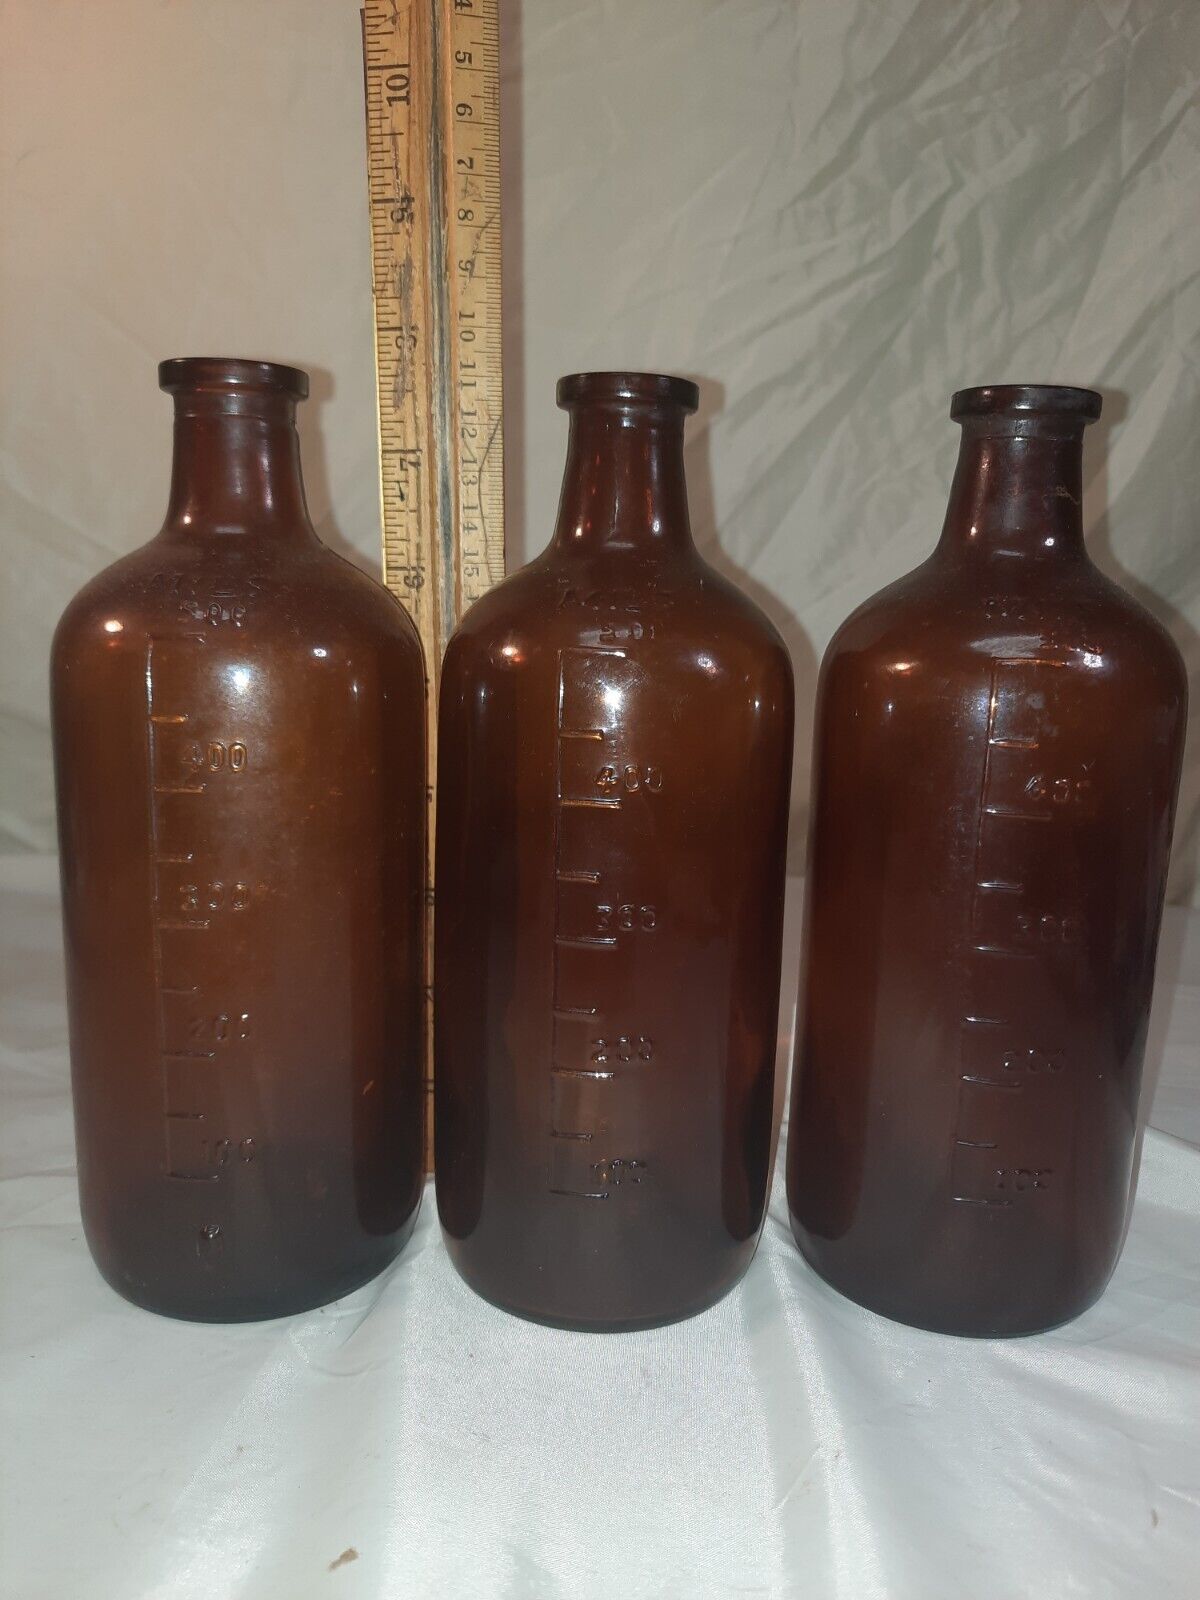 1 - 1938 & 2-1959 Owens Illinois Glass 500 Mils Apothecary Bottles Amber Brown